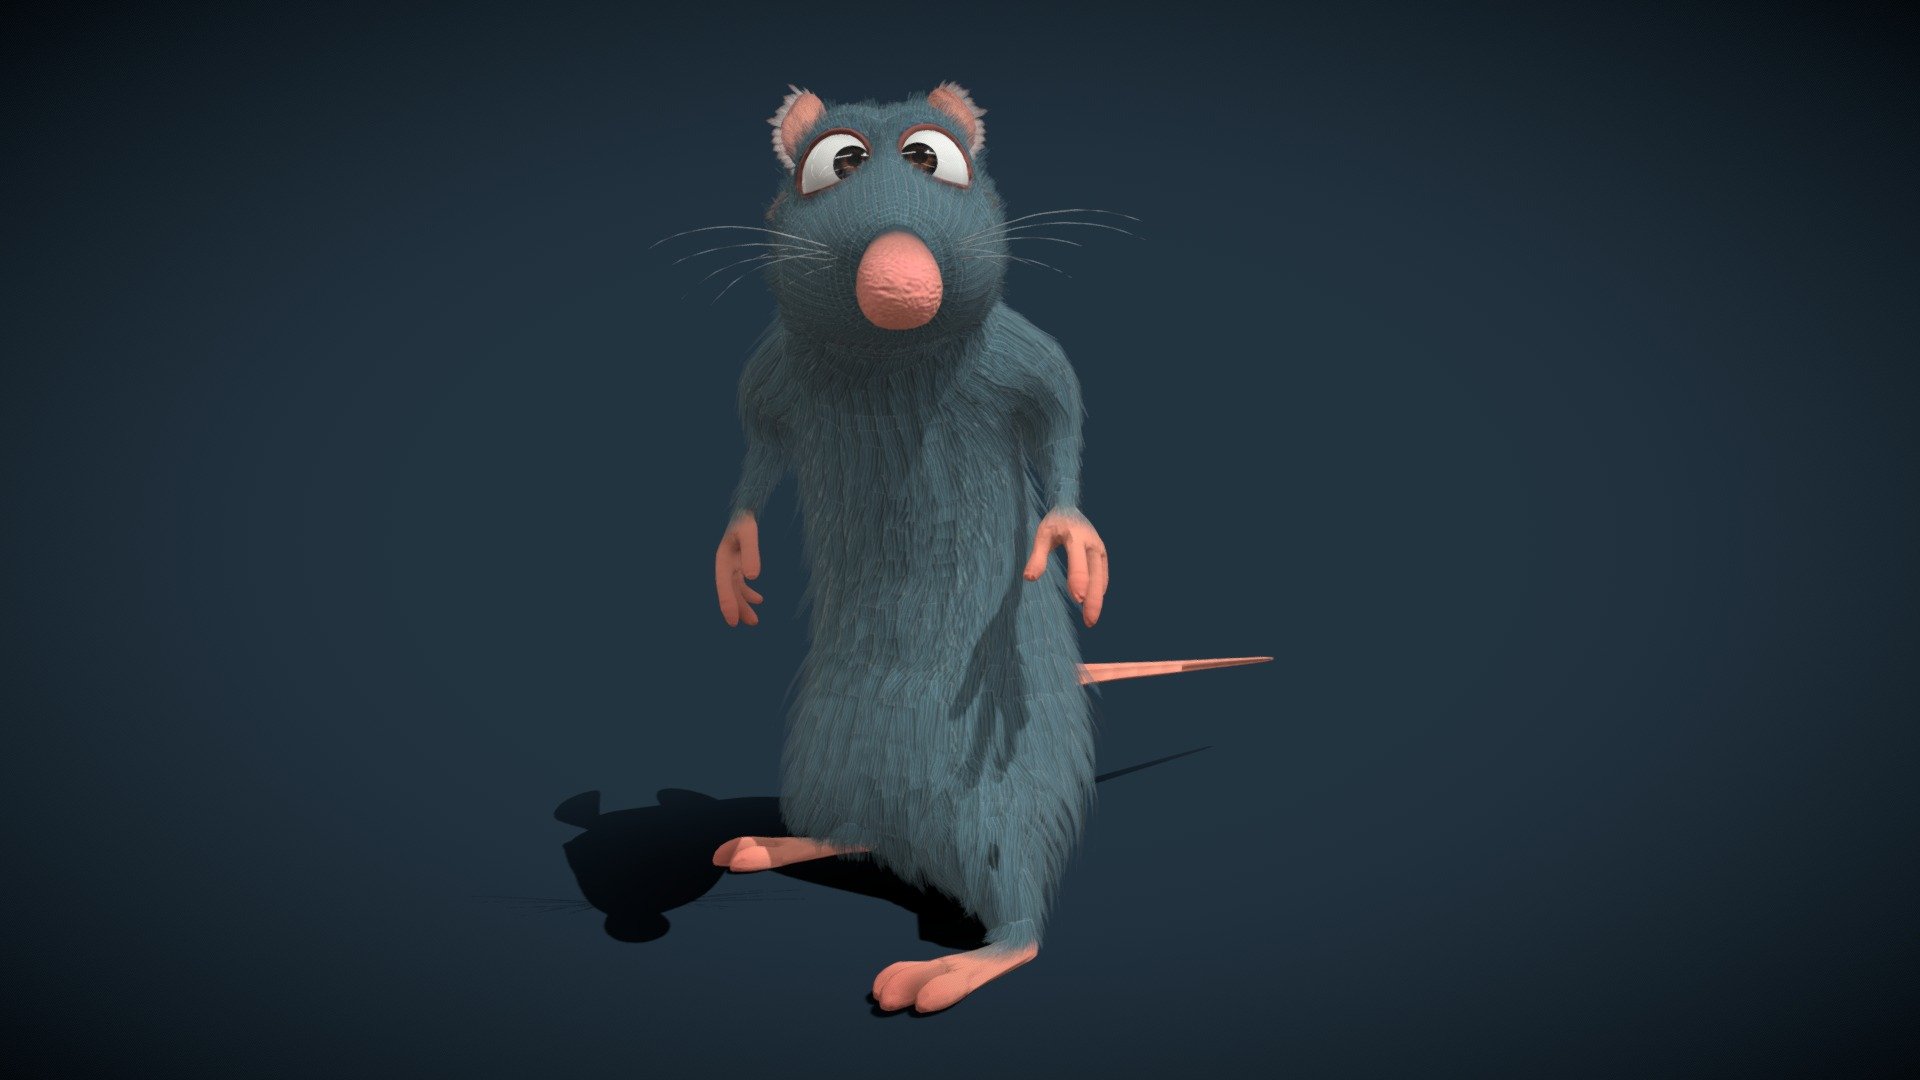 Remy from the best Disney PIXAR movie of all time, Ratatouille
Free download

I changed a few things with the mesh and textures and rigged it, but
If used credit this website: https://rigmodels.com/model.php?view=Remy_Rat-3d-model__KCGEHYXE9H6UGMLXGCCYP2B01&amp;searchkeyword=business&amp;manualsearch=1 - Remy - Ratatouille - Download Free 3D model by Jacob Quintana (@jacobq1004) 3d model